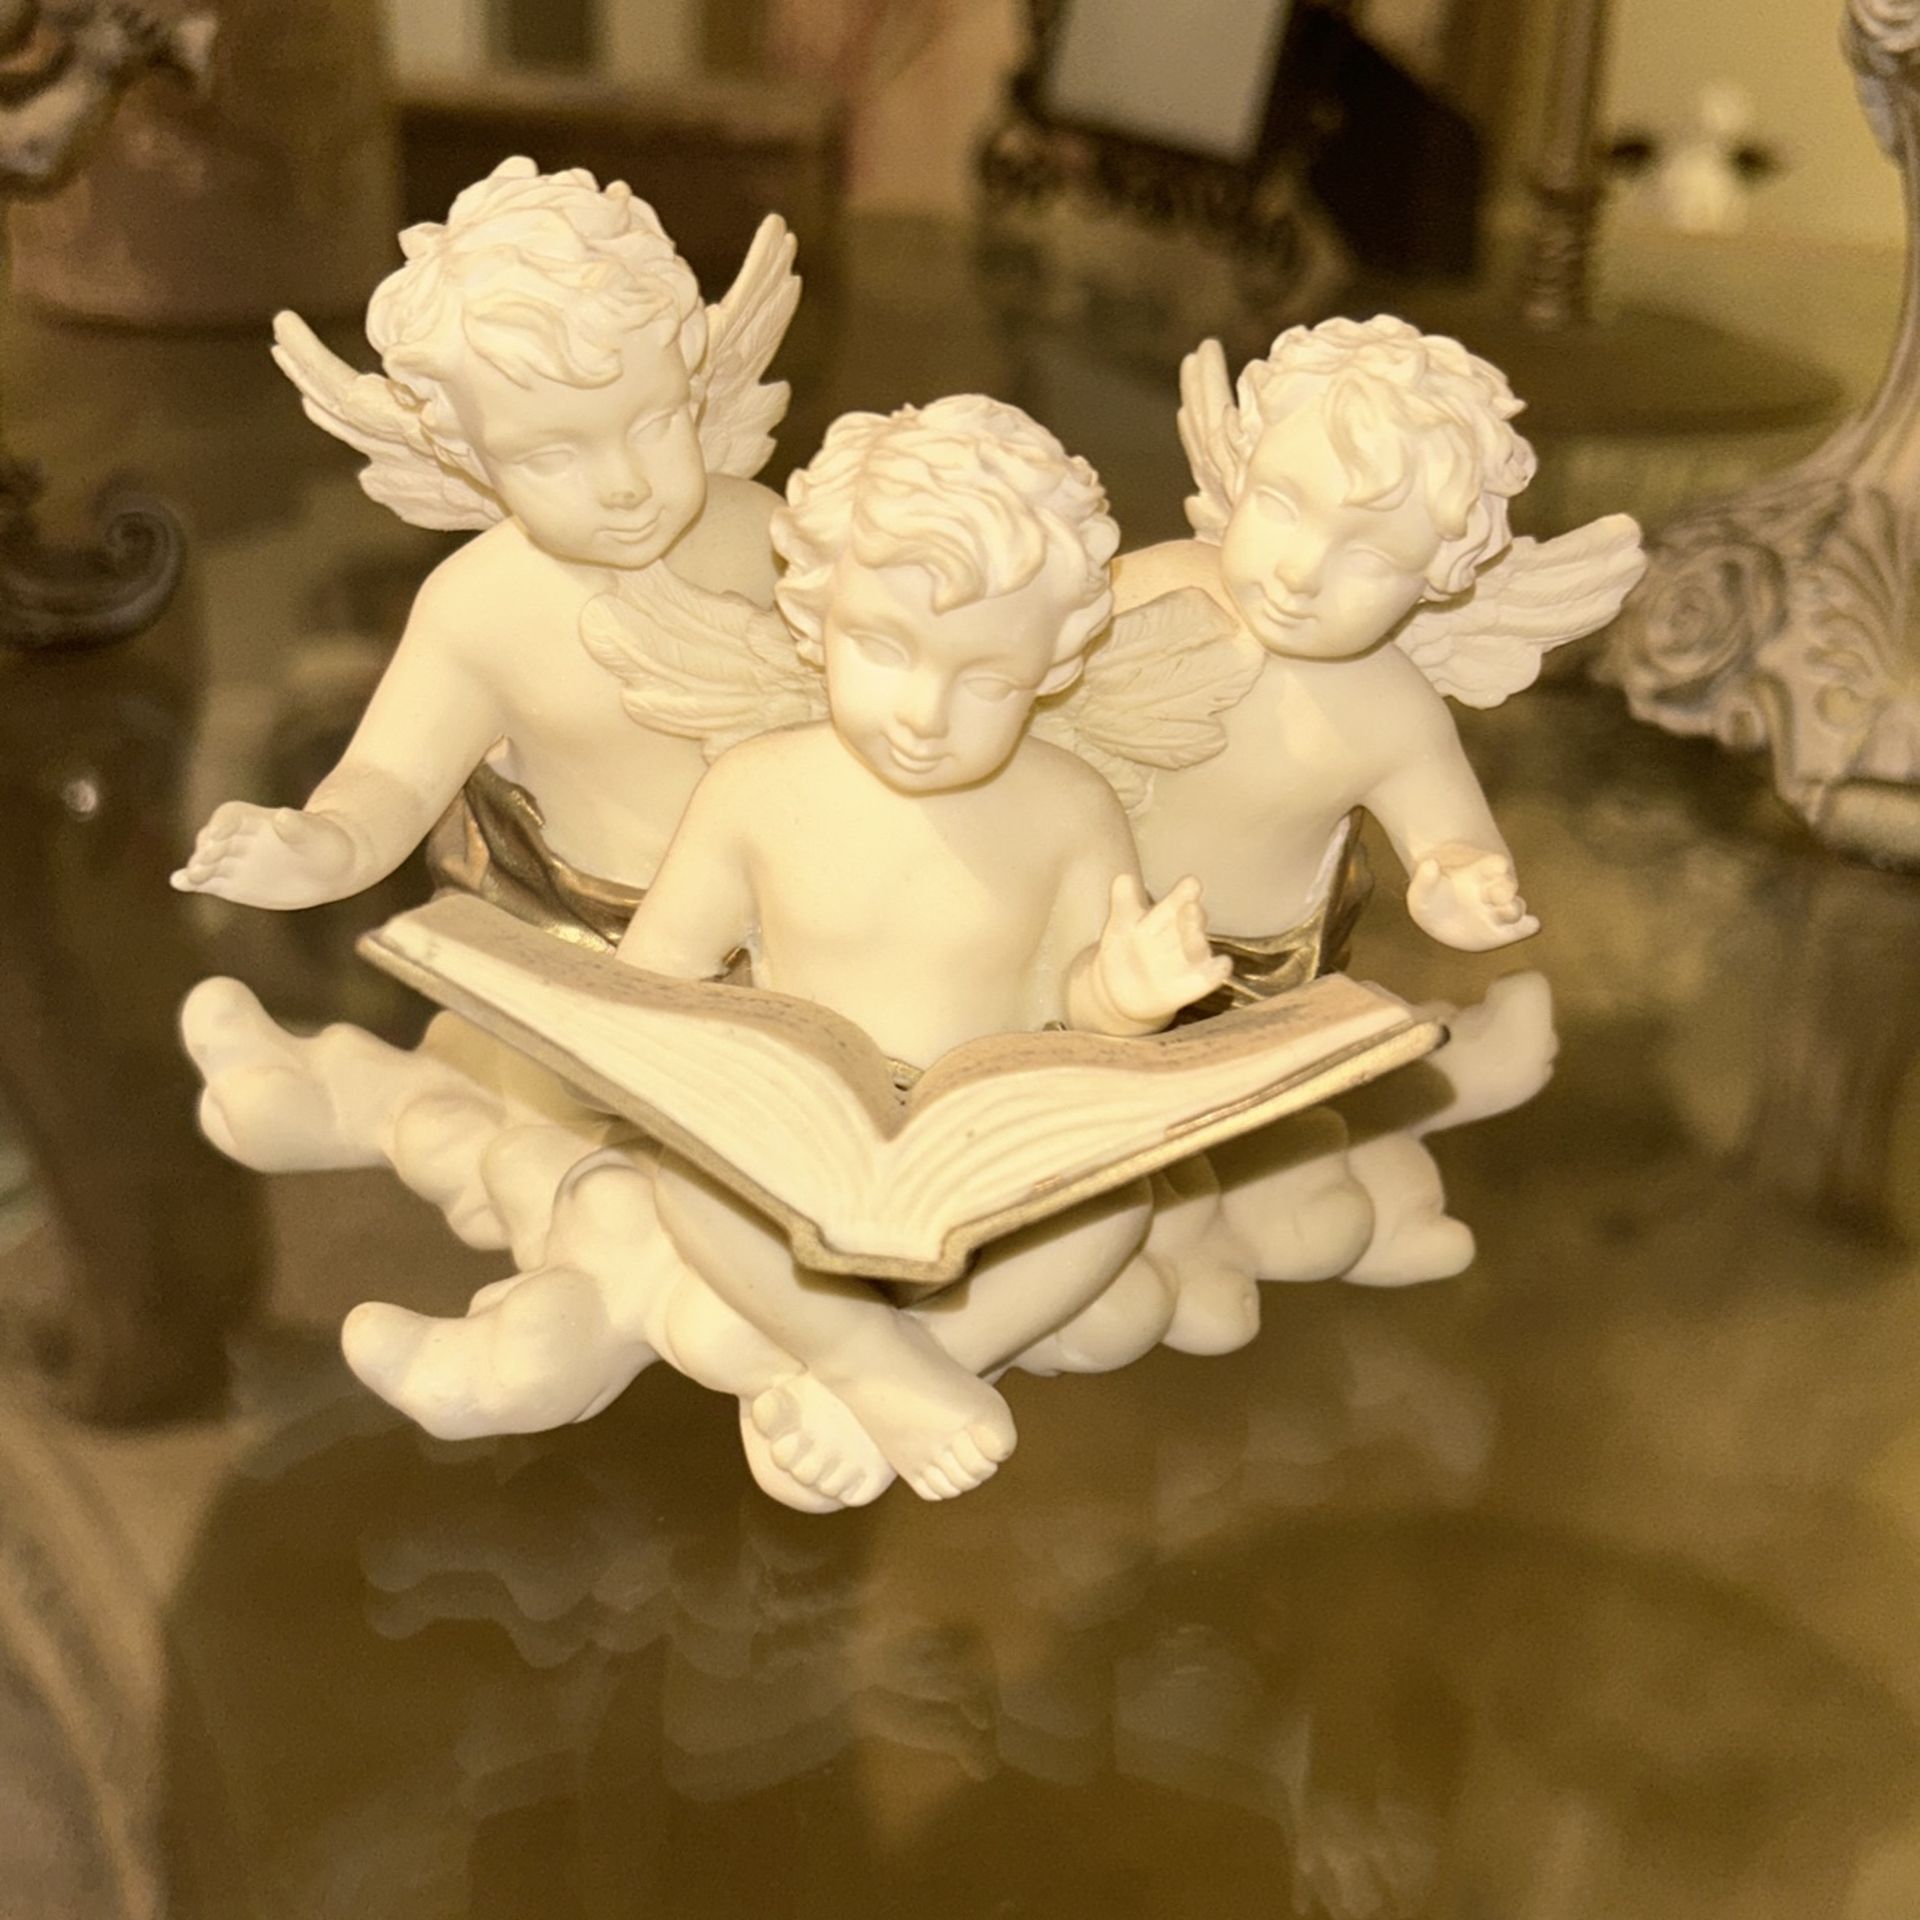 Porcelain Figurine of Three Angels Reading on a Cloud - Name Your Price